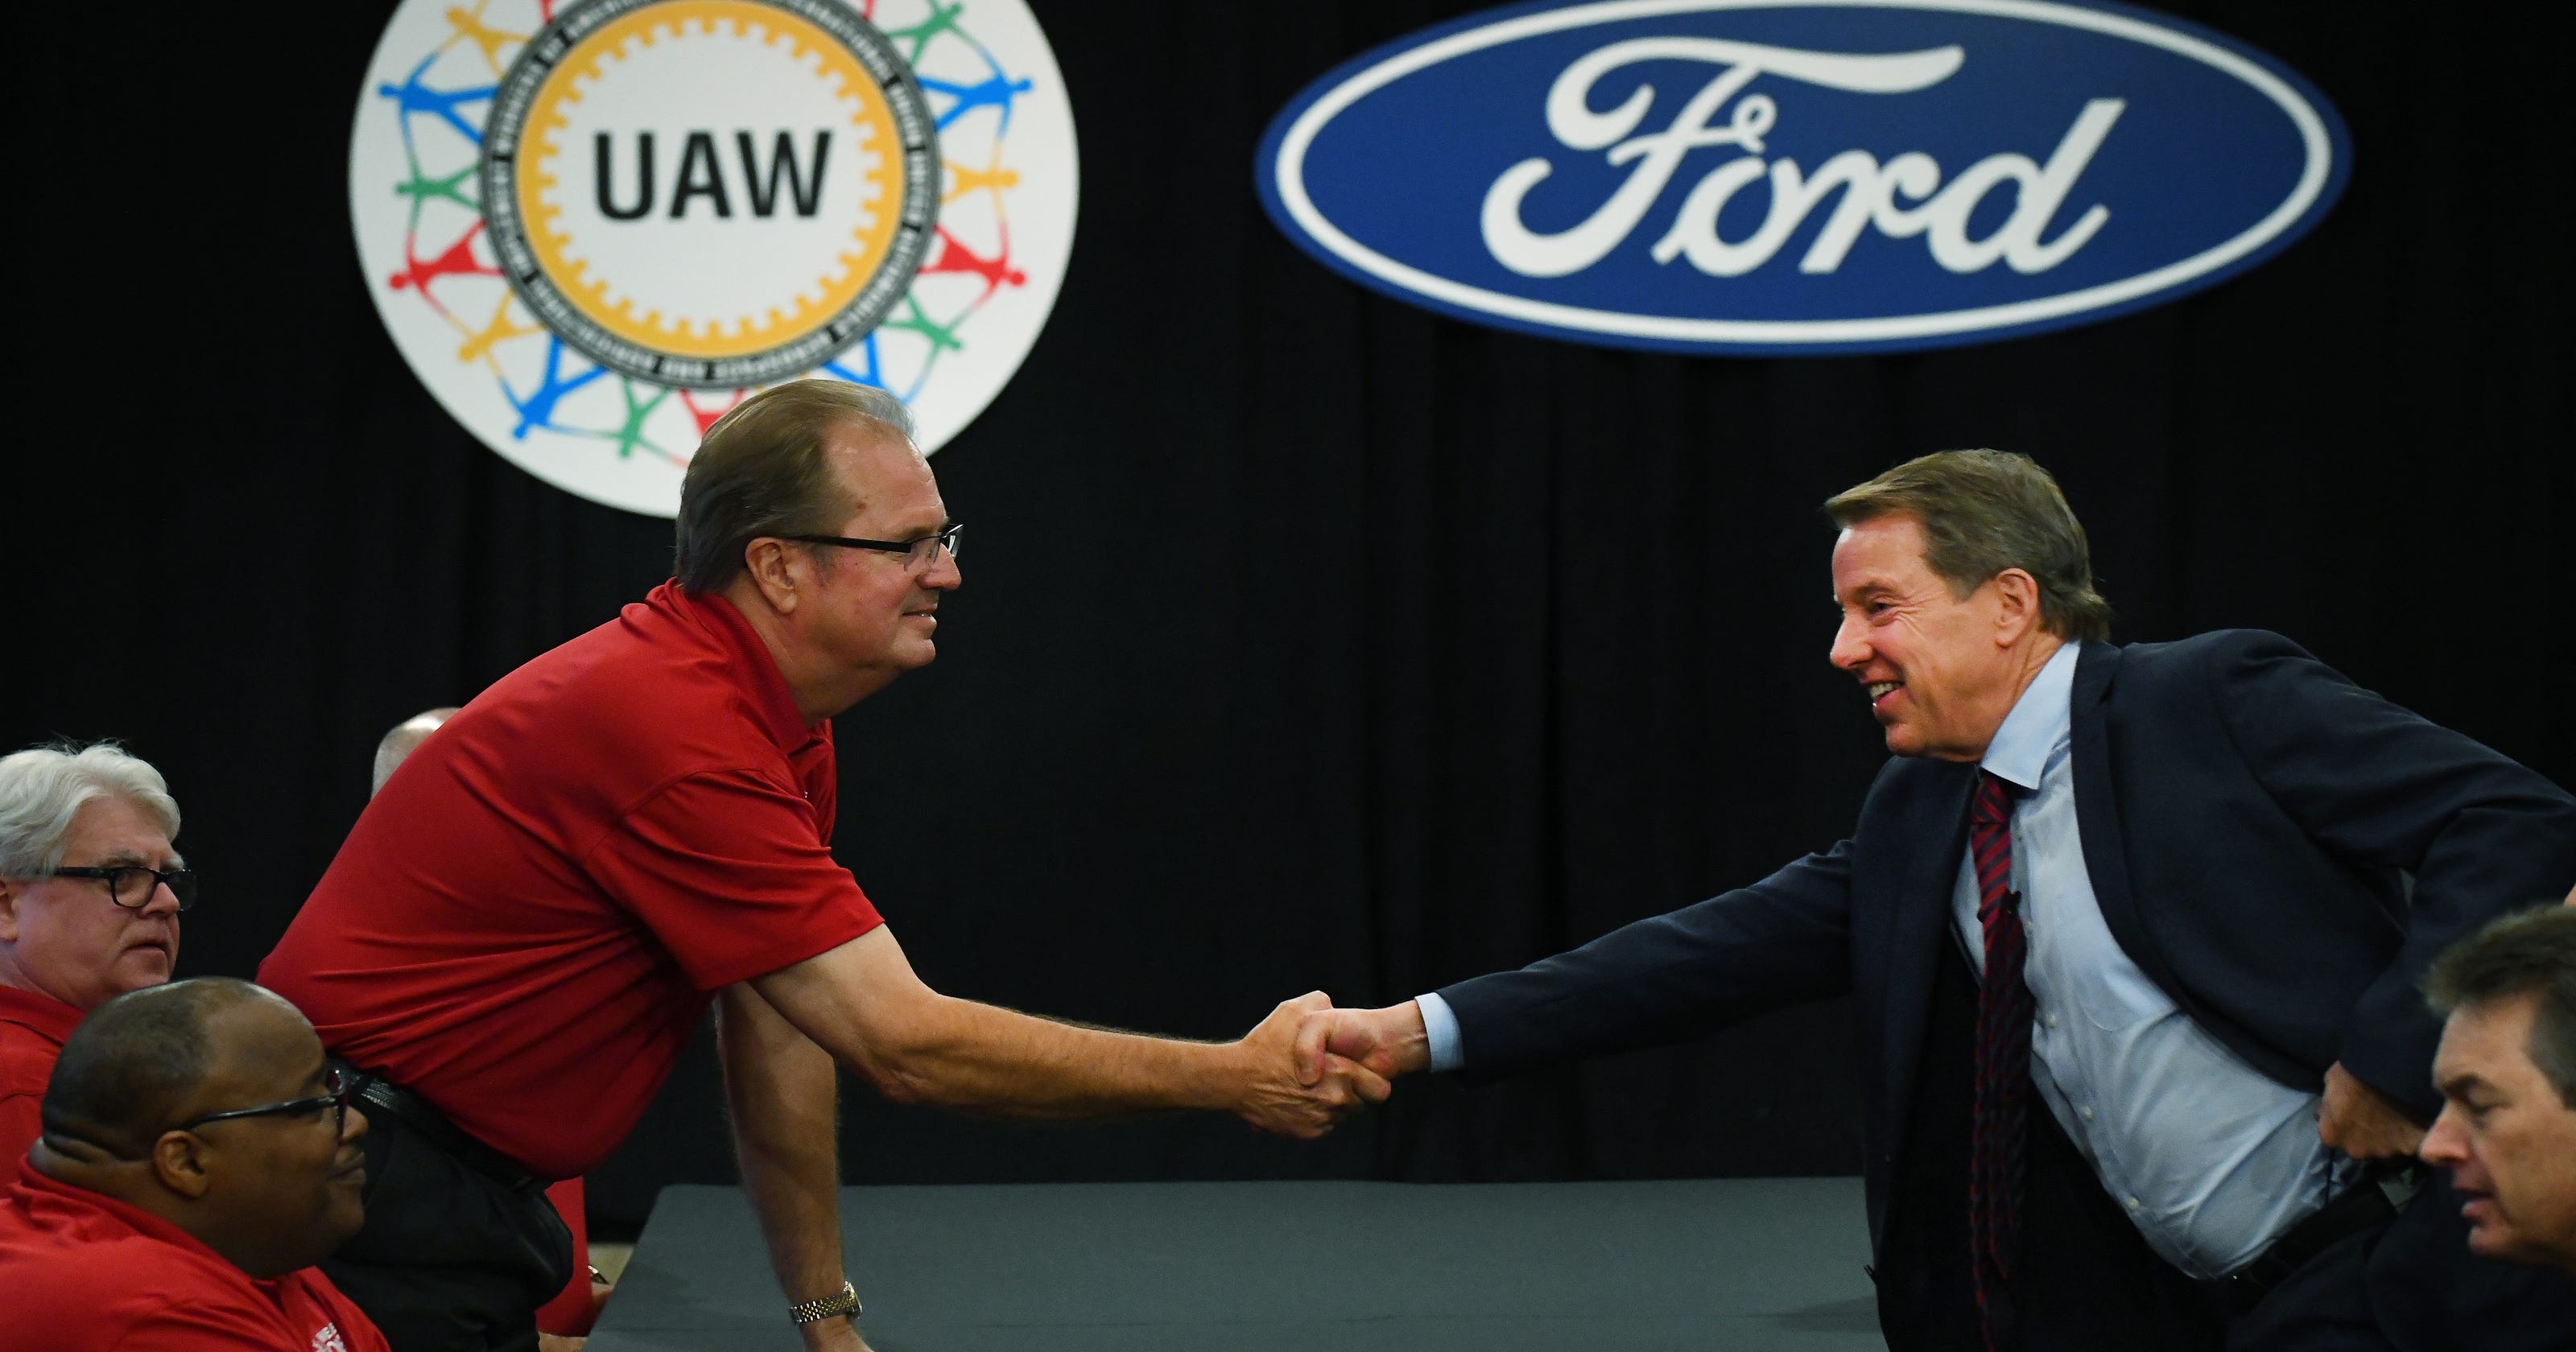 GMUAW tentative agreement lays tough pattern for Ford, FCA